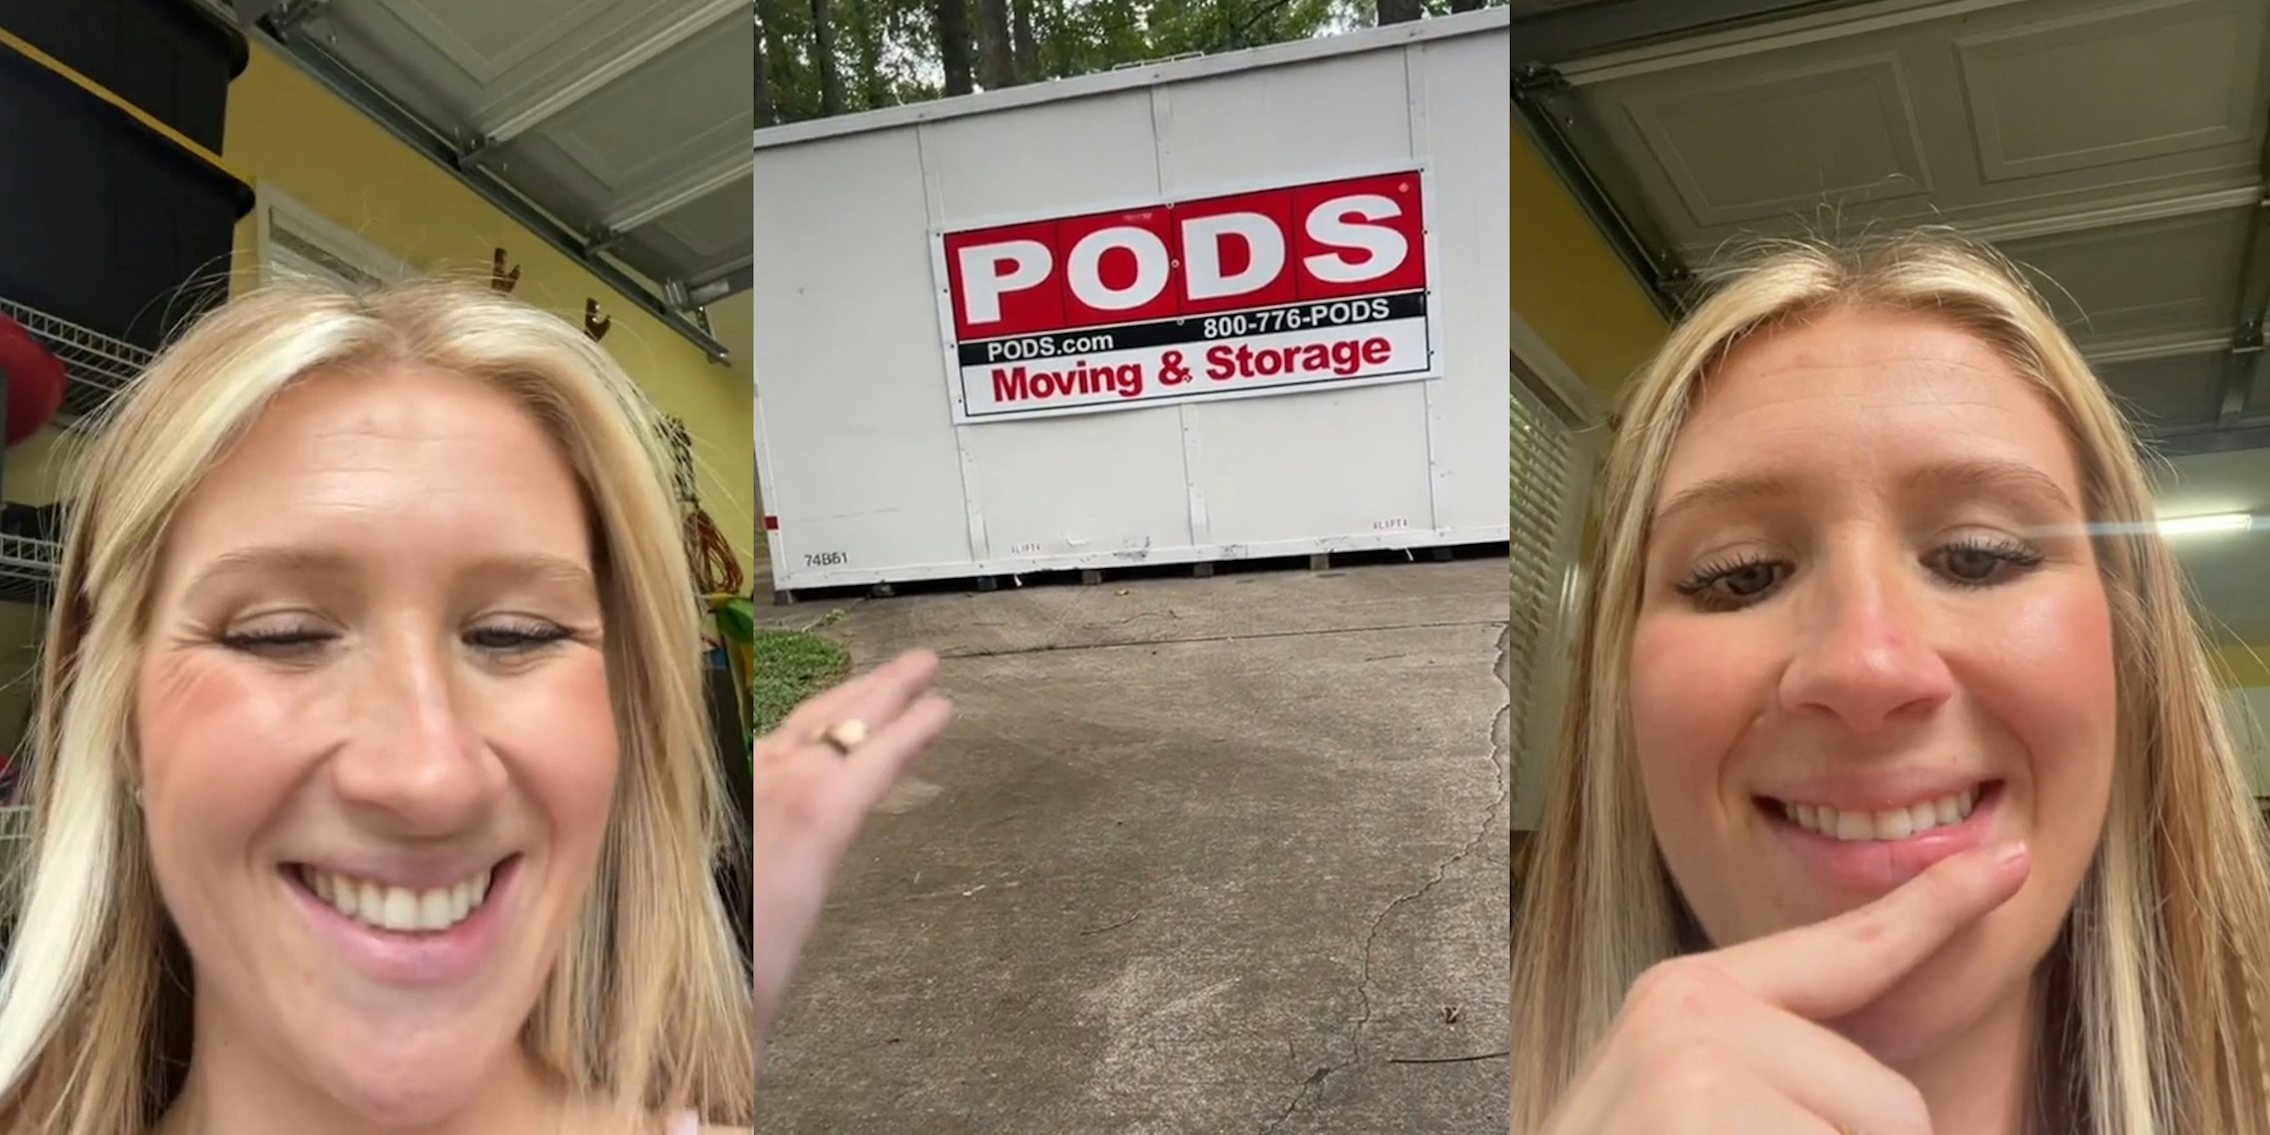 TikToker says PODS delivered a giant container to her house.